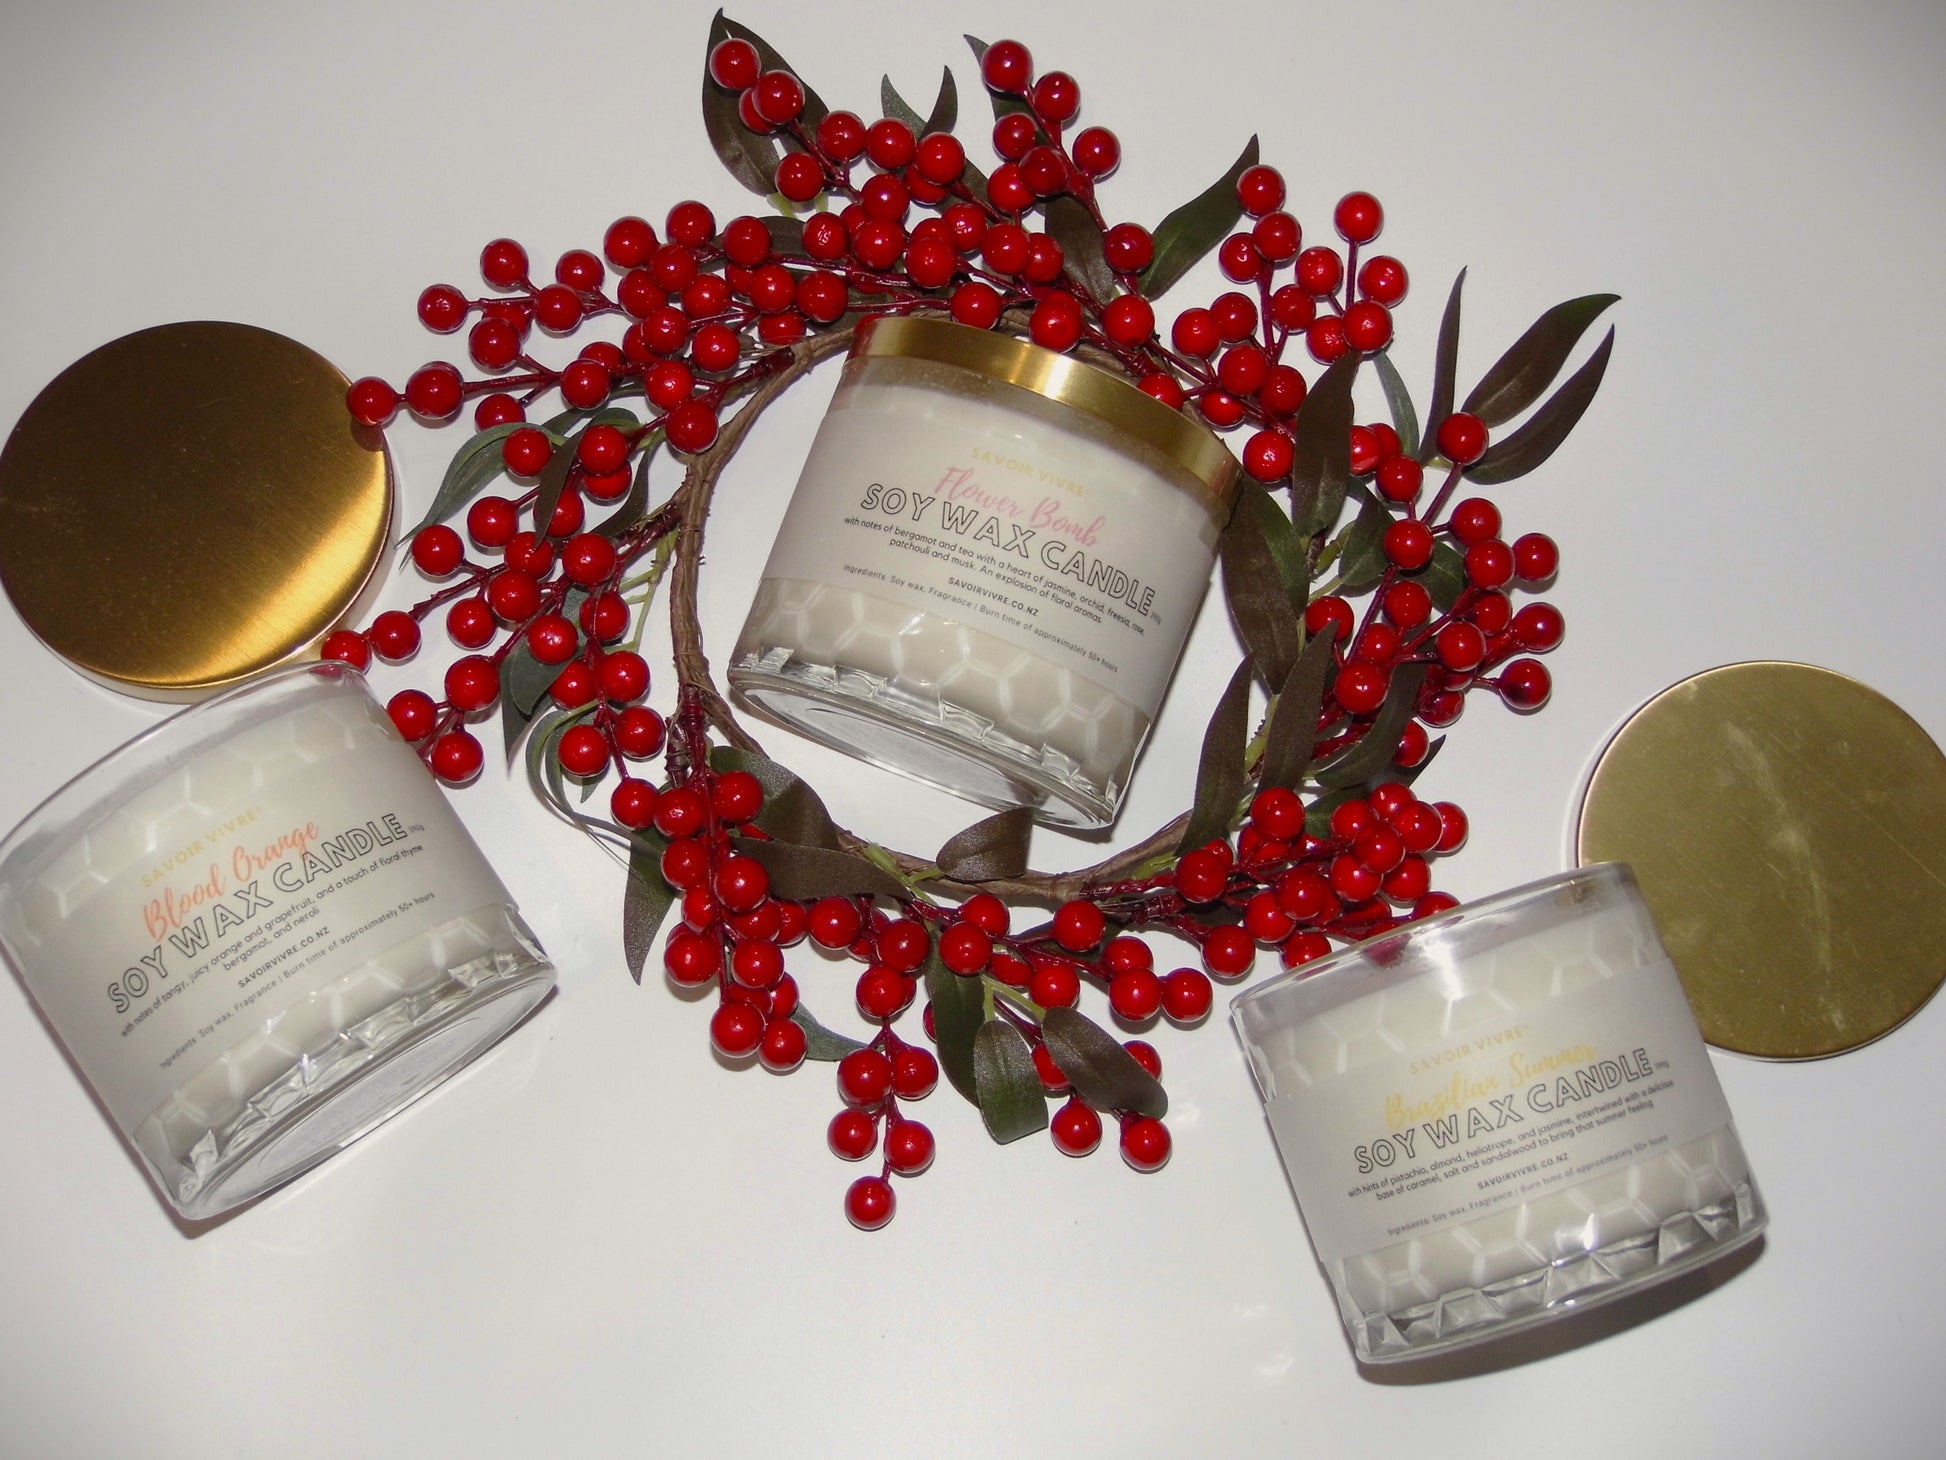 Blood Orange, Flowerbomb and Brazilian Summer Soy Wax Candle NZ